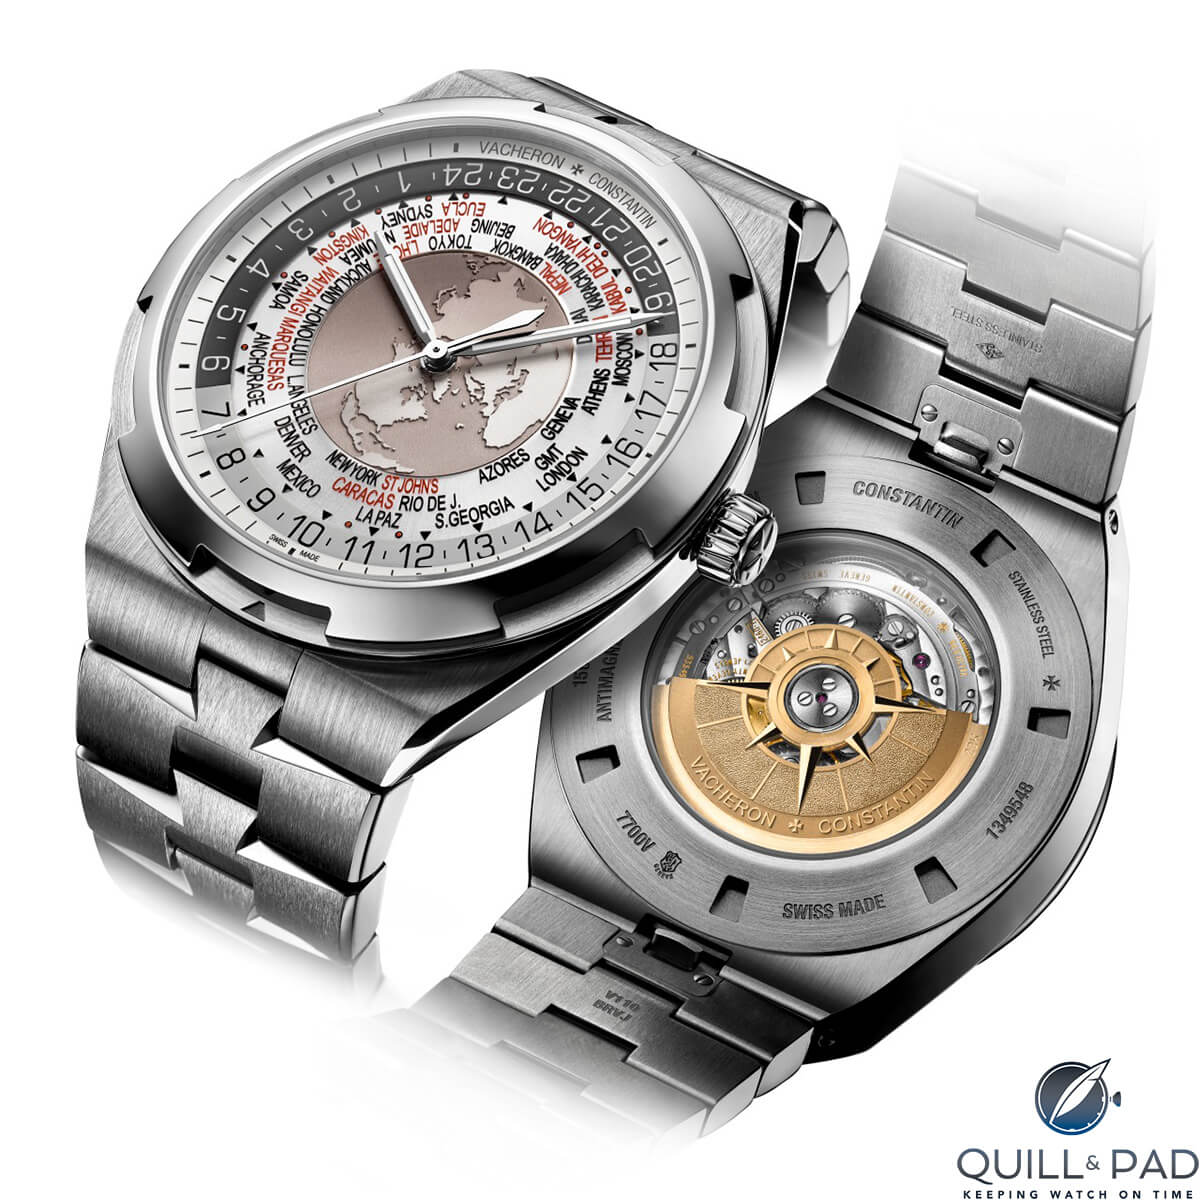 Vacheron Constantin Overseas Worldtimer from the back: check out the rotor’s windrose design